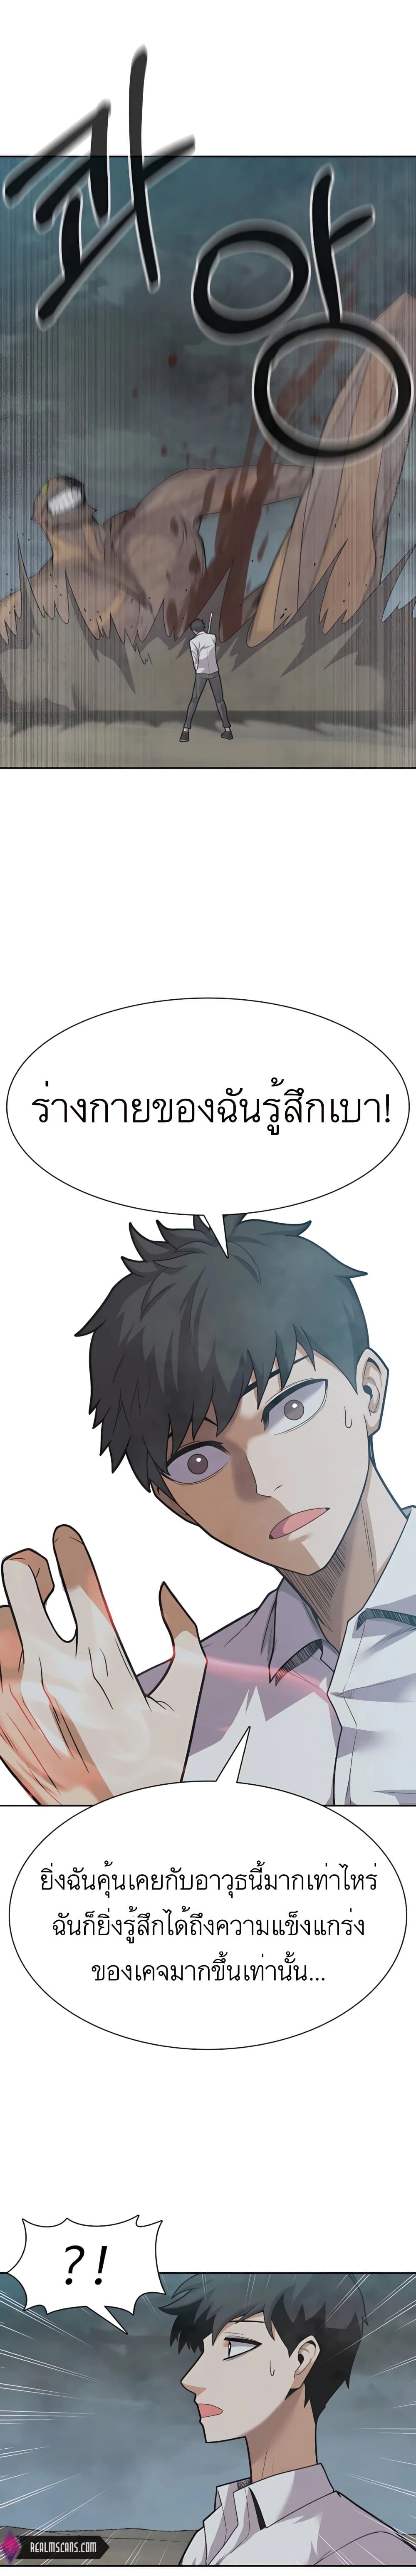 Raising Newbie Heroes In Another World ตอนที่ 26 (1)